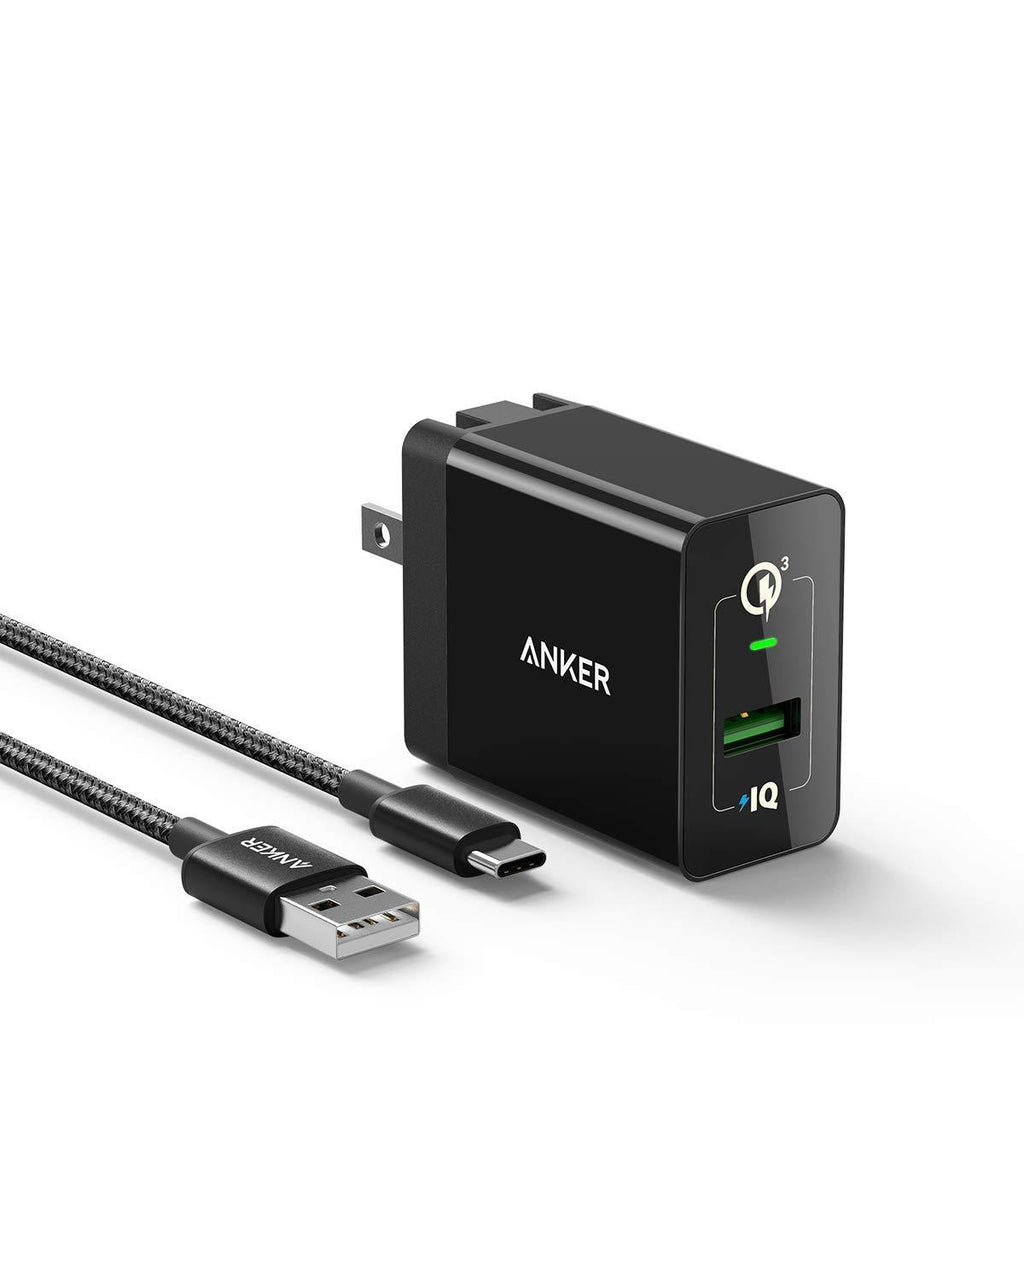 Quick Charge 3.0, Anker 18W USB Wall Charger (Quick Charge 2.0 Compatible) Powerport+ 1 for Anker Wireless Charger, Galaxy S10e/S10/S9, Note 9/8, LG G7, iPhone and More (USB-A to USB-C Cable Included)